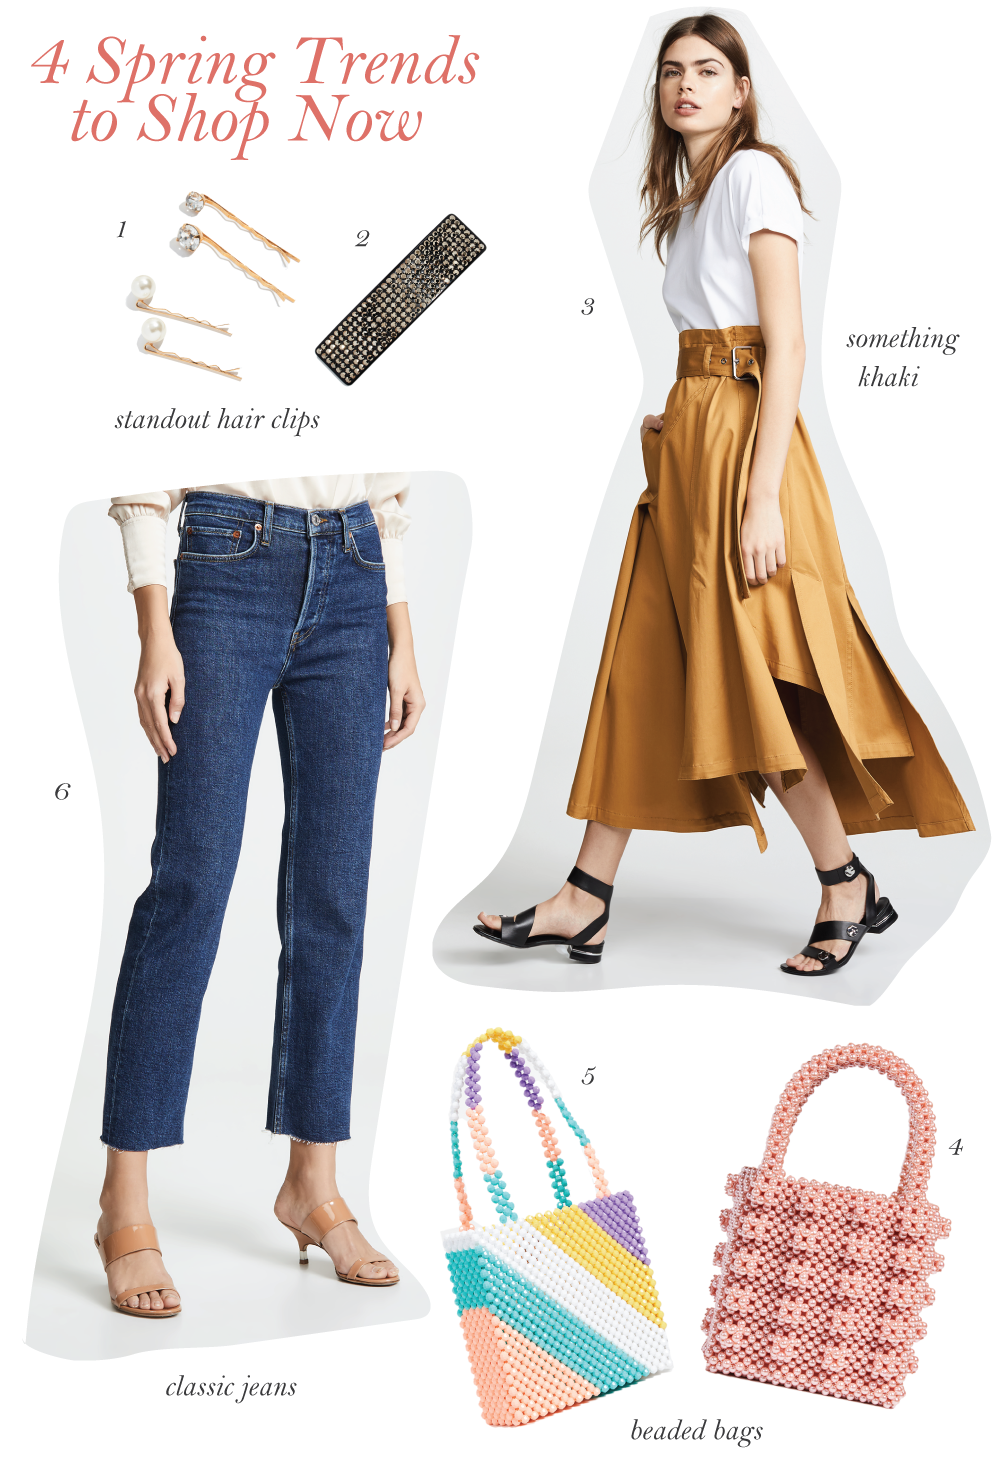 4 Spring Trends to Shop Now